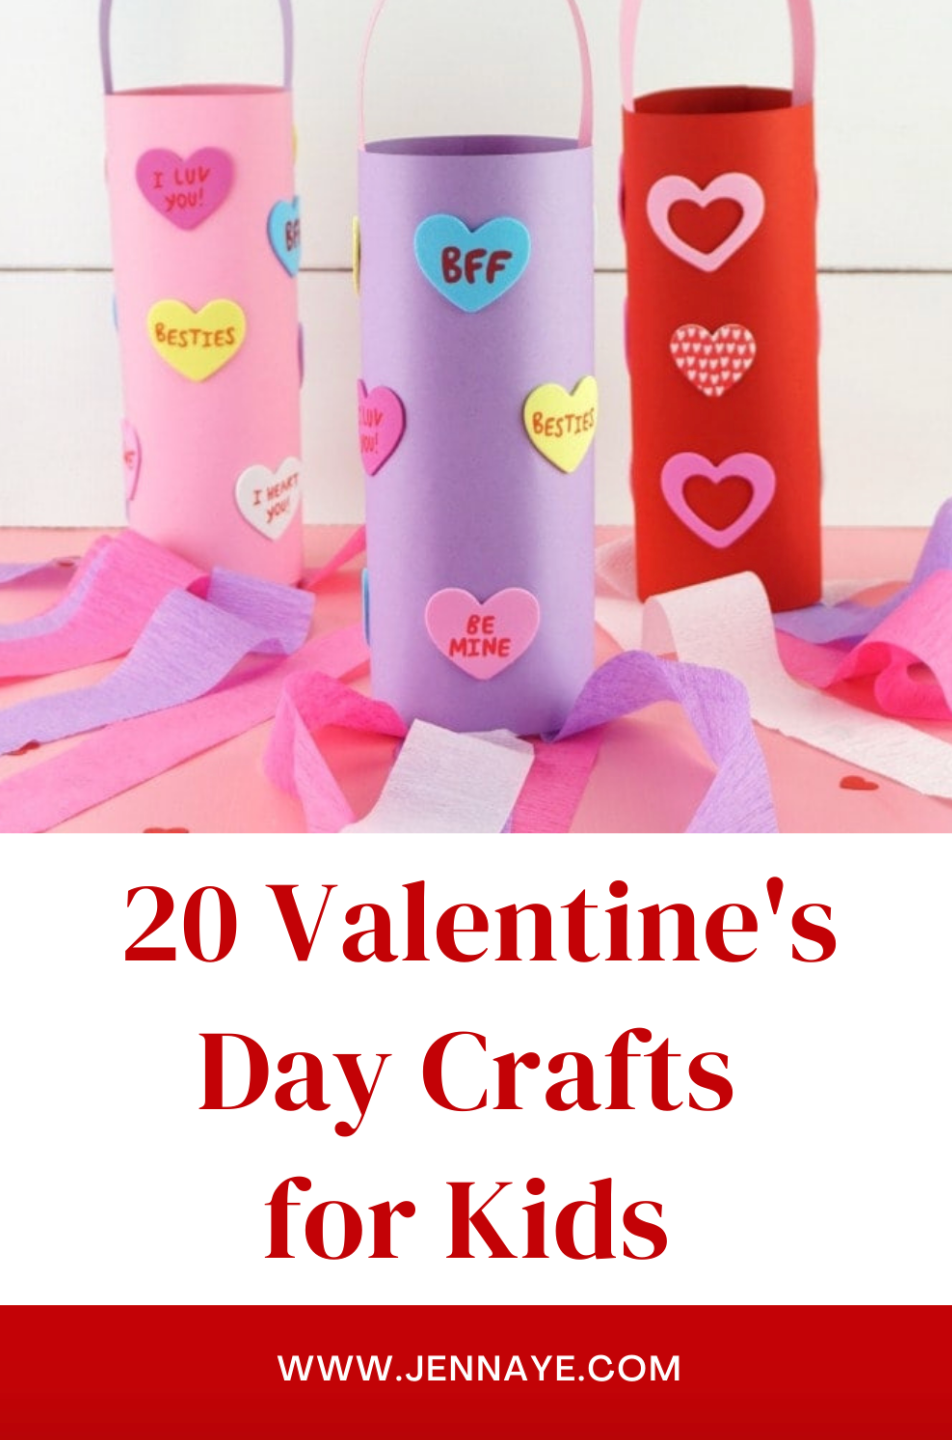 Valentines Day Cards For Kids: Free Printable Download - Ideas for the Home